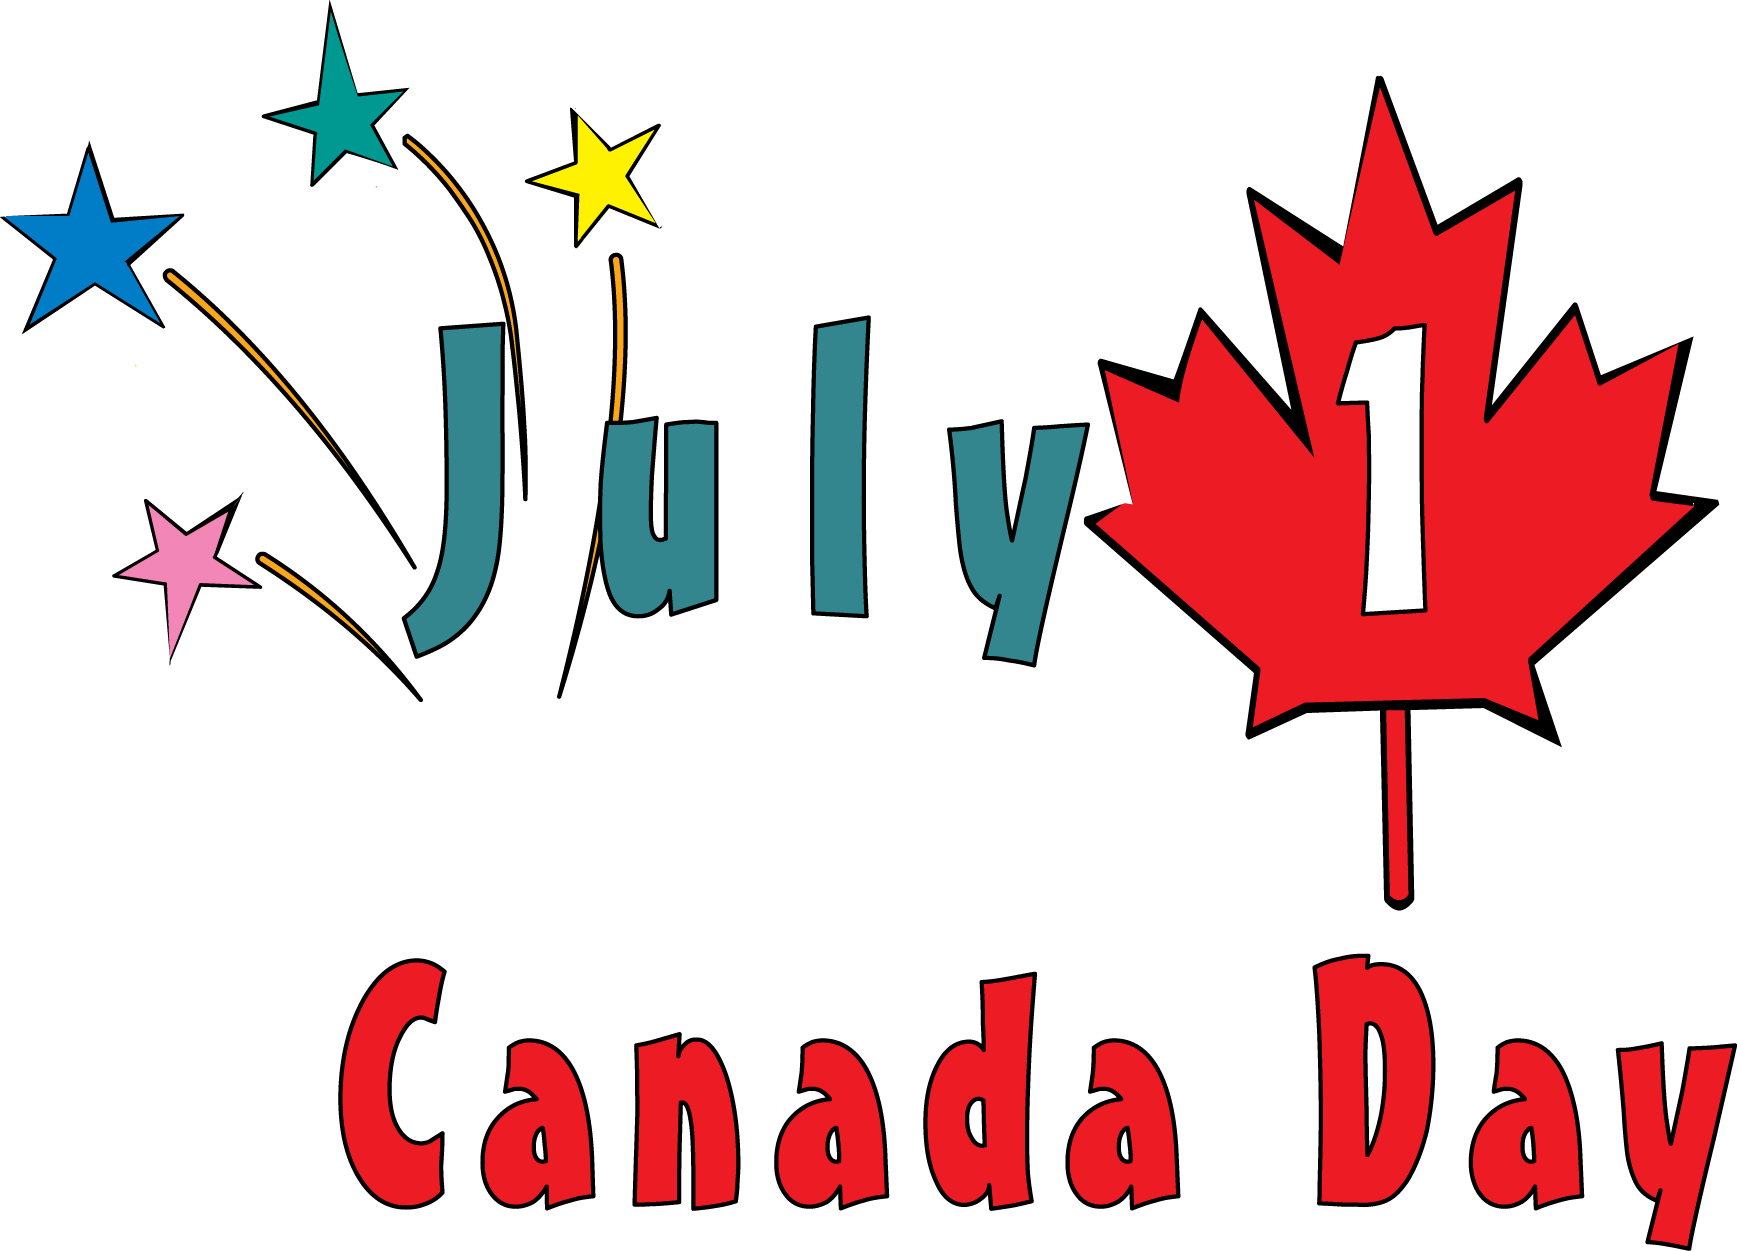 Happy Canada Day 2022 Image for Facebook